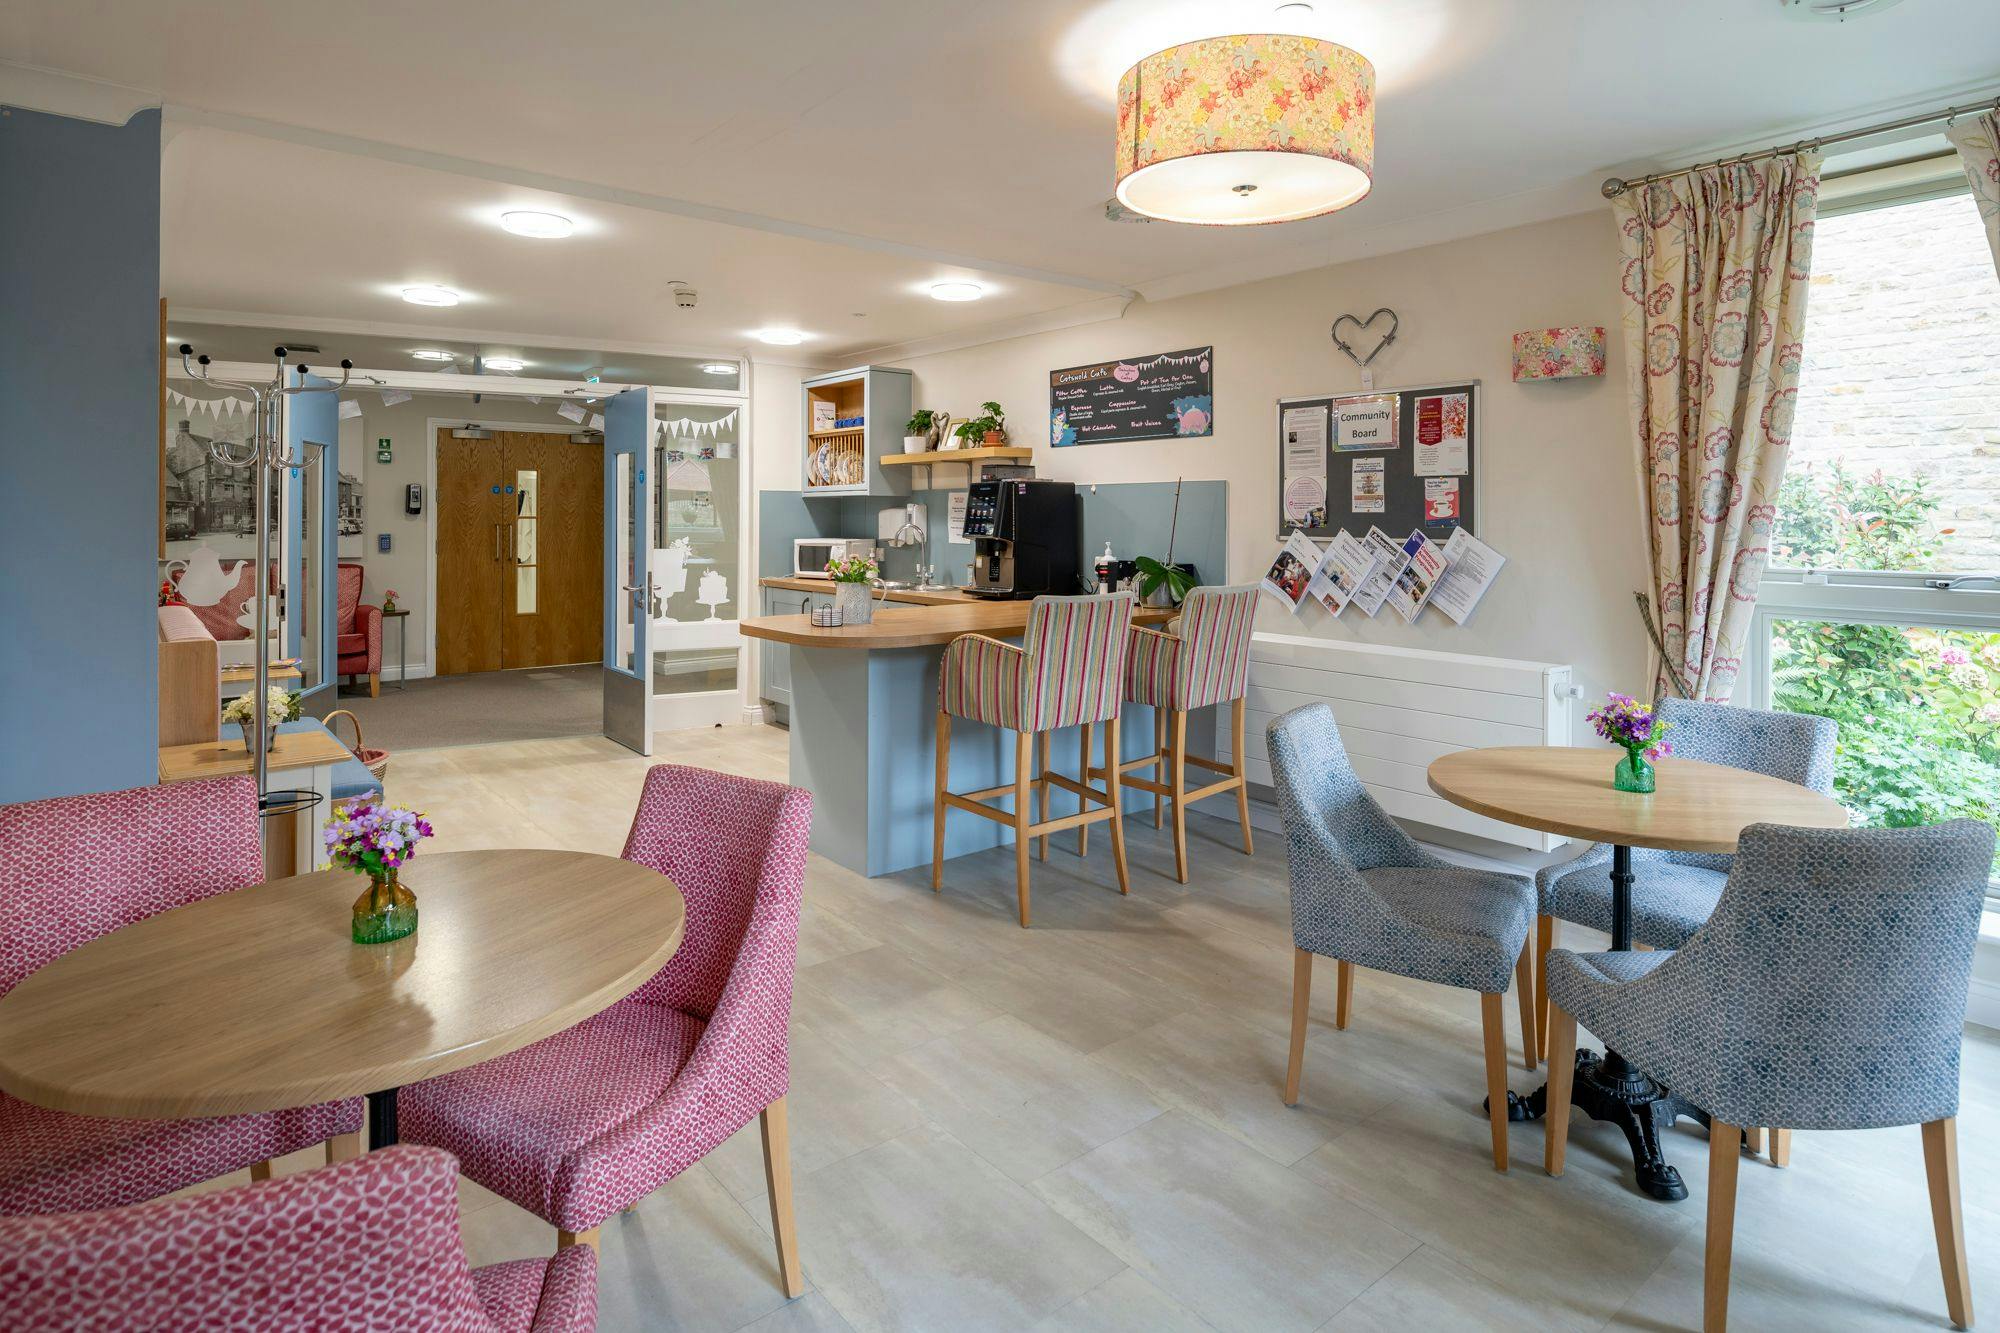 Dining room at Edwardstow Court Care Home in Stow-on-the-Wold, Cotswold